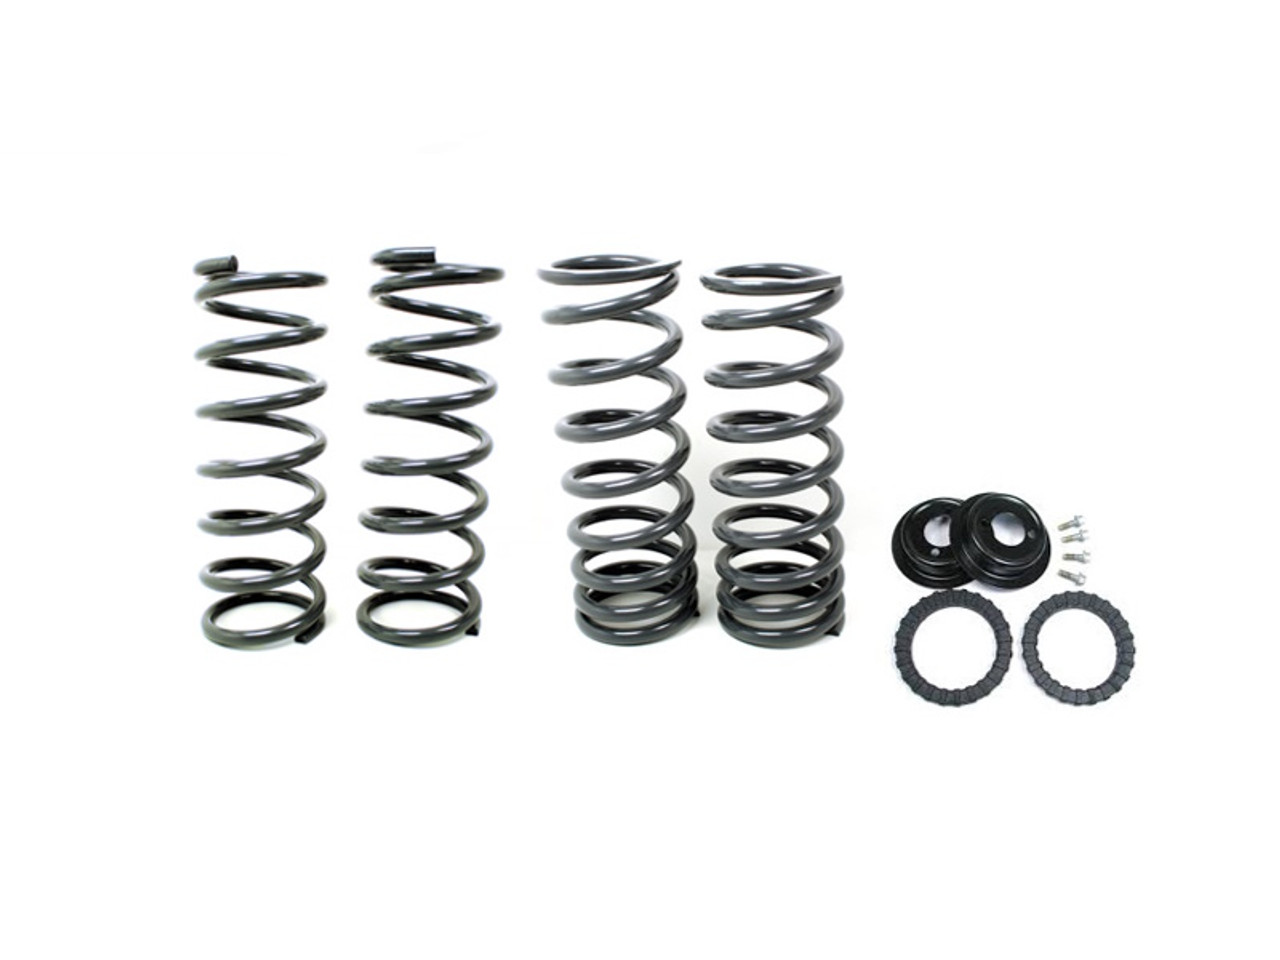 Terrafirma Discovery 2 Plus 2 Inch Air To Coil Heavy Load Conversion Spring Kit - TF228-SPRINGS